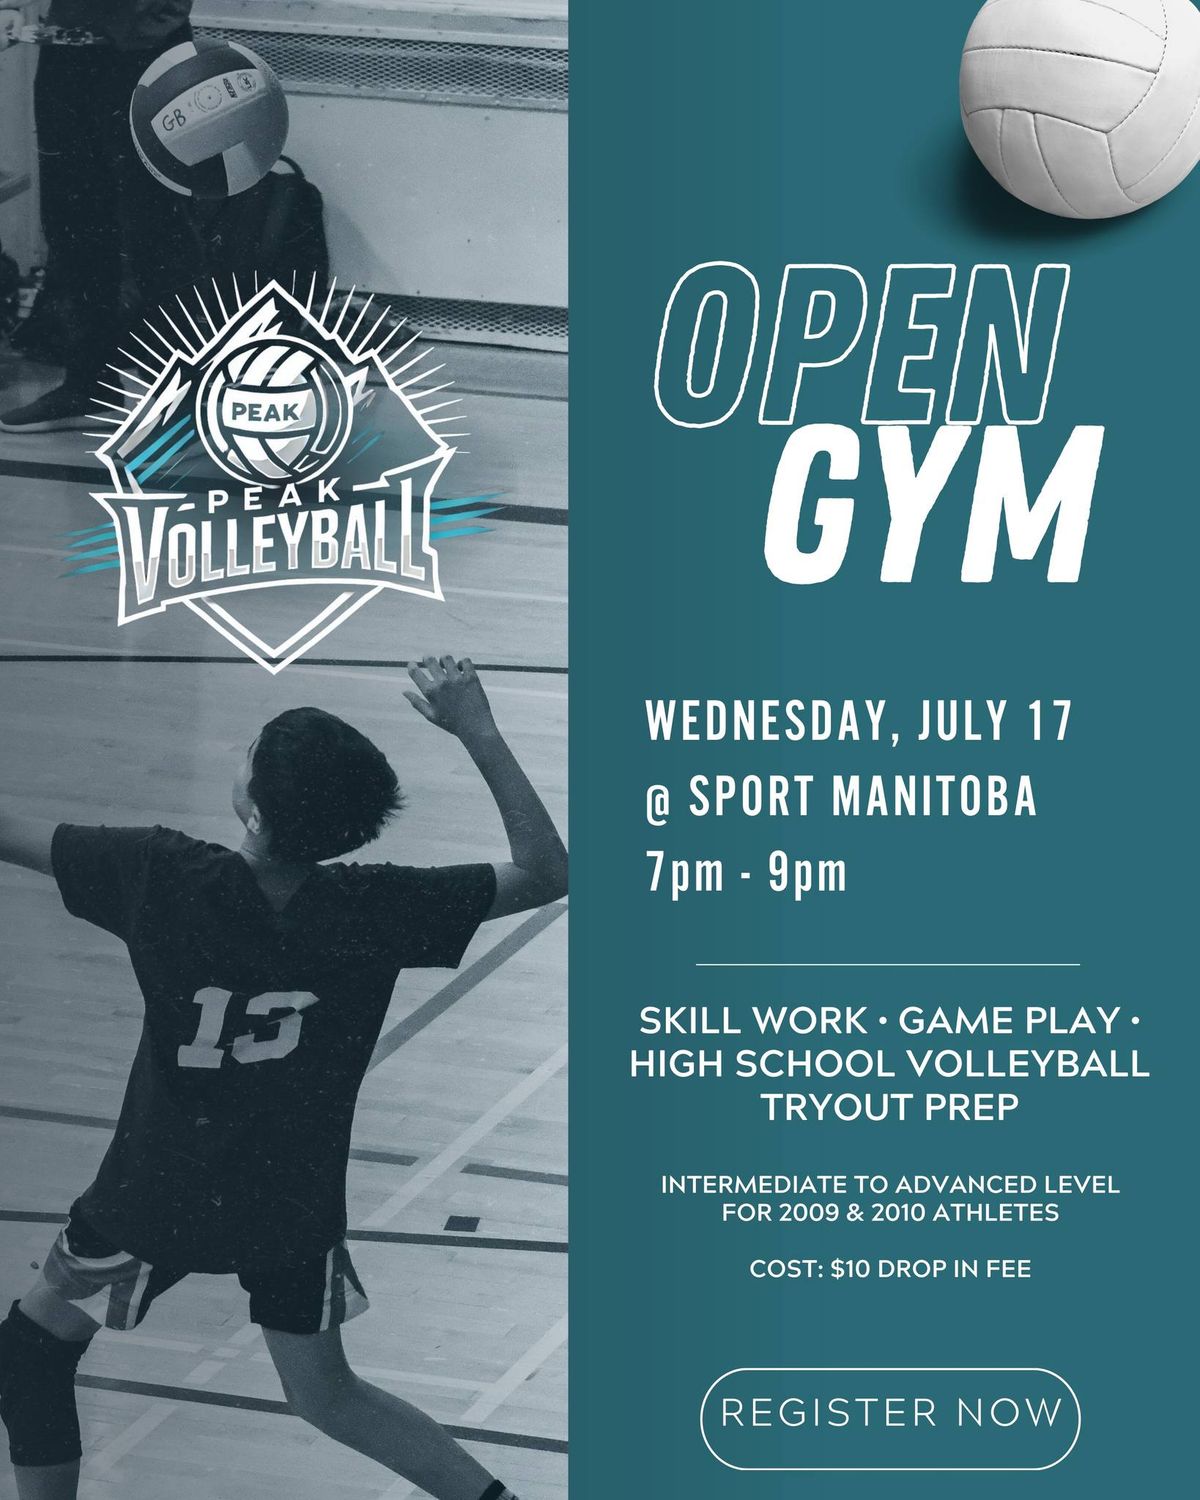 Peak Volleyball OPEN GYM Volleyball Skill Camp